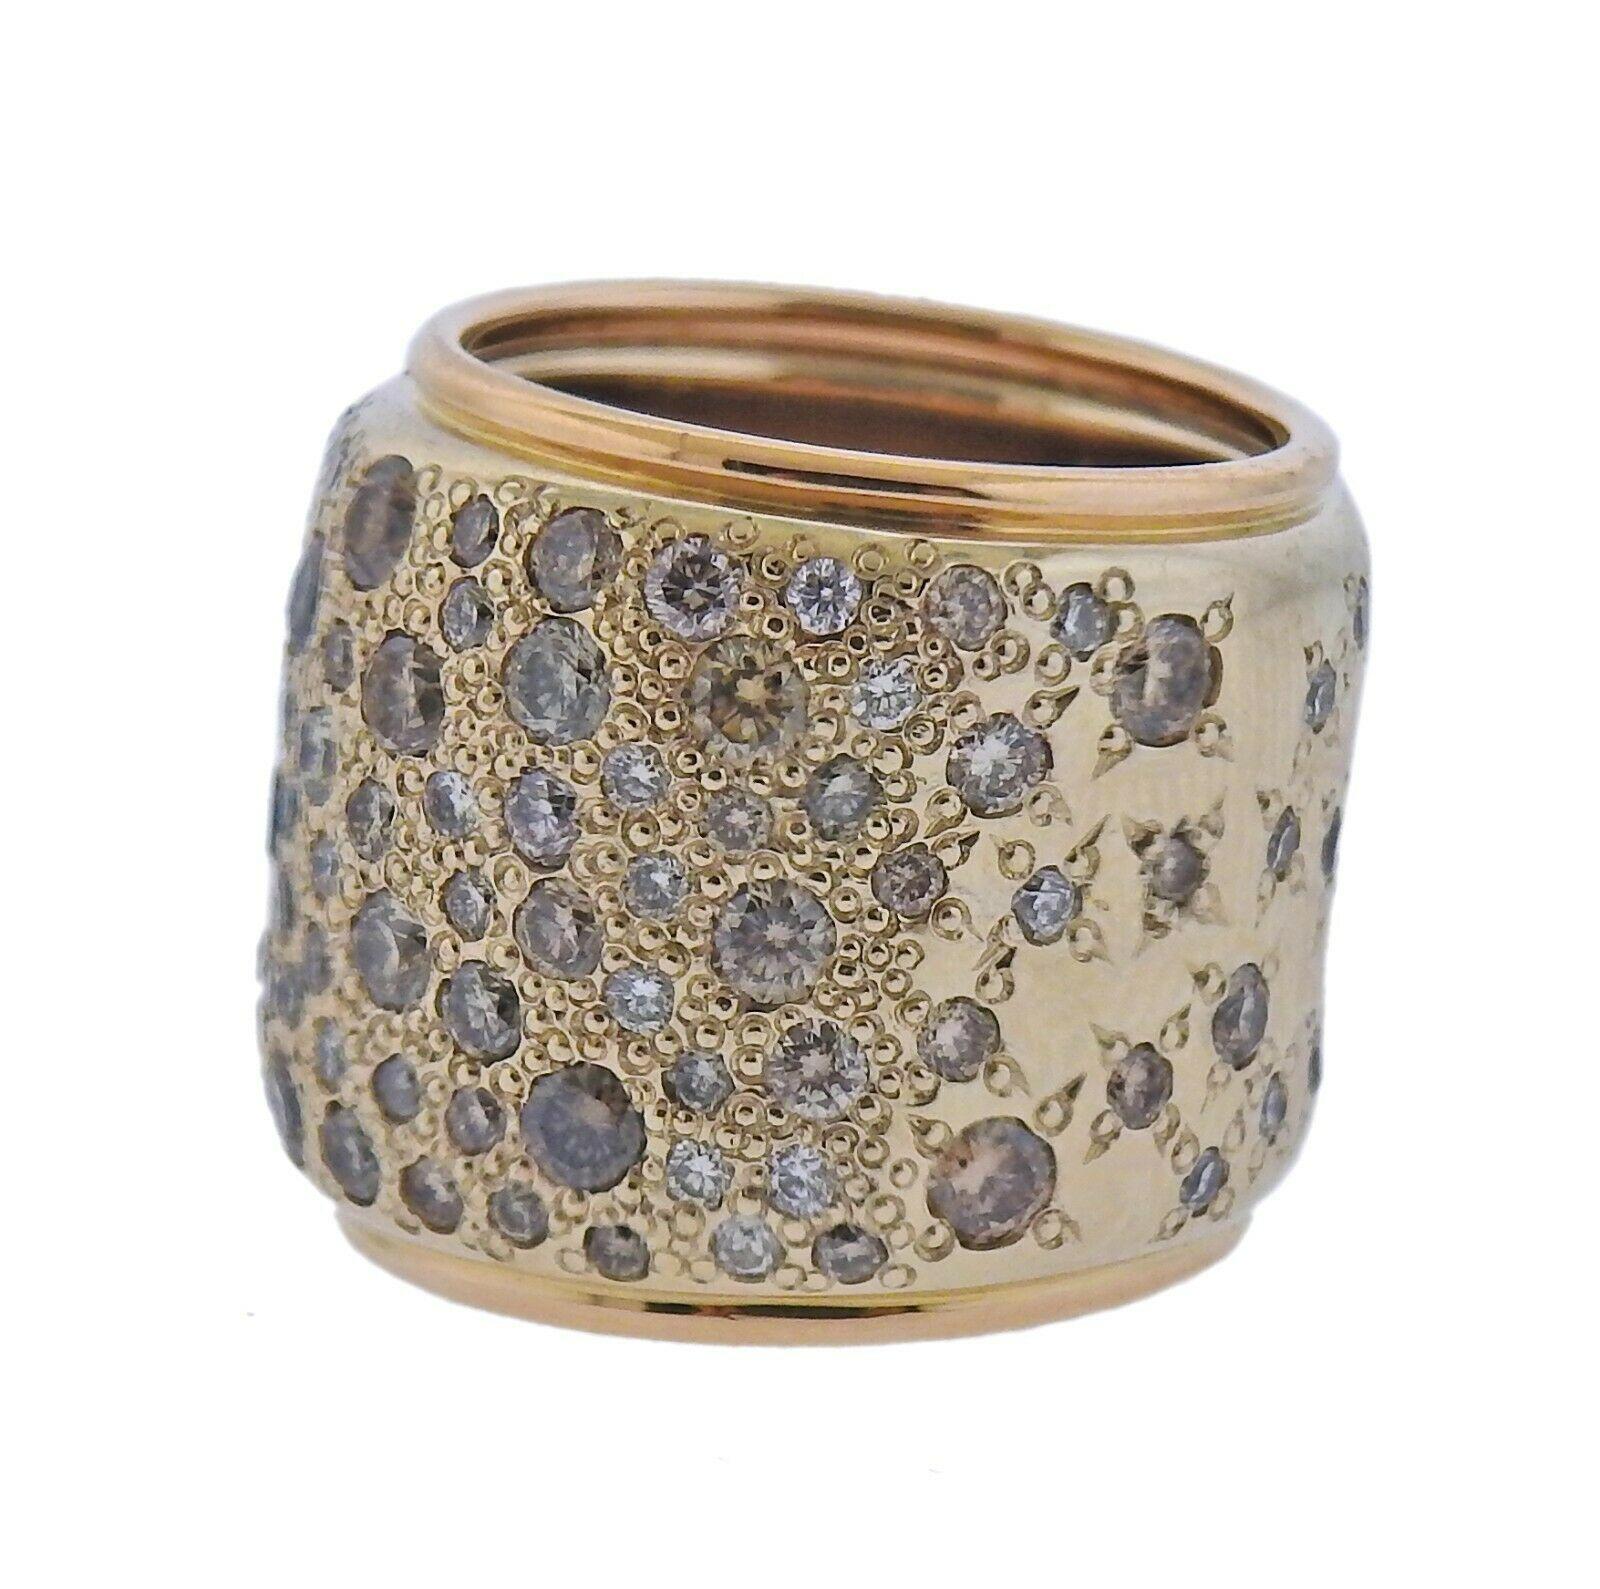 Iconic Sabbia 18k wide band ring by Pomellato, with approx. 3.32cts in fancy diamonds.   Ring size - 5.25, ring is 18mm wide.   Weight - 29.1 grams. Marked: Pomellato, 750, Italian mark.